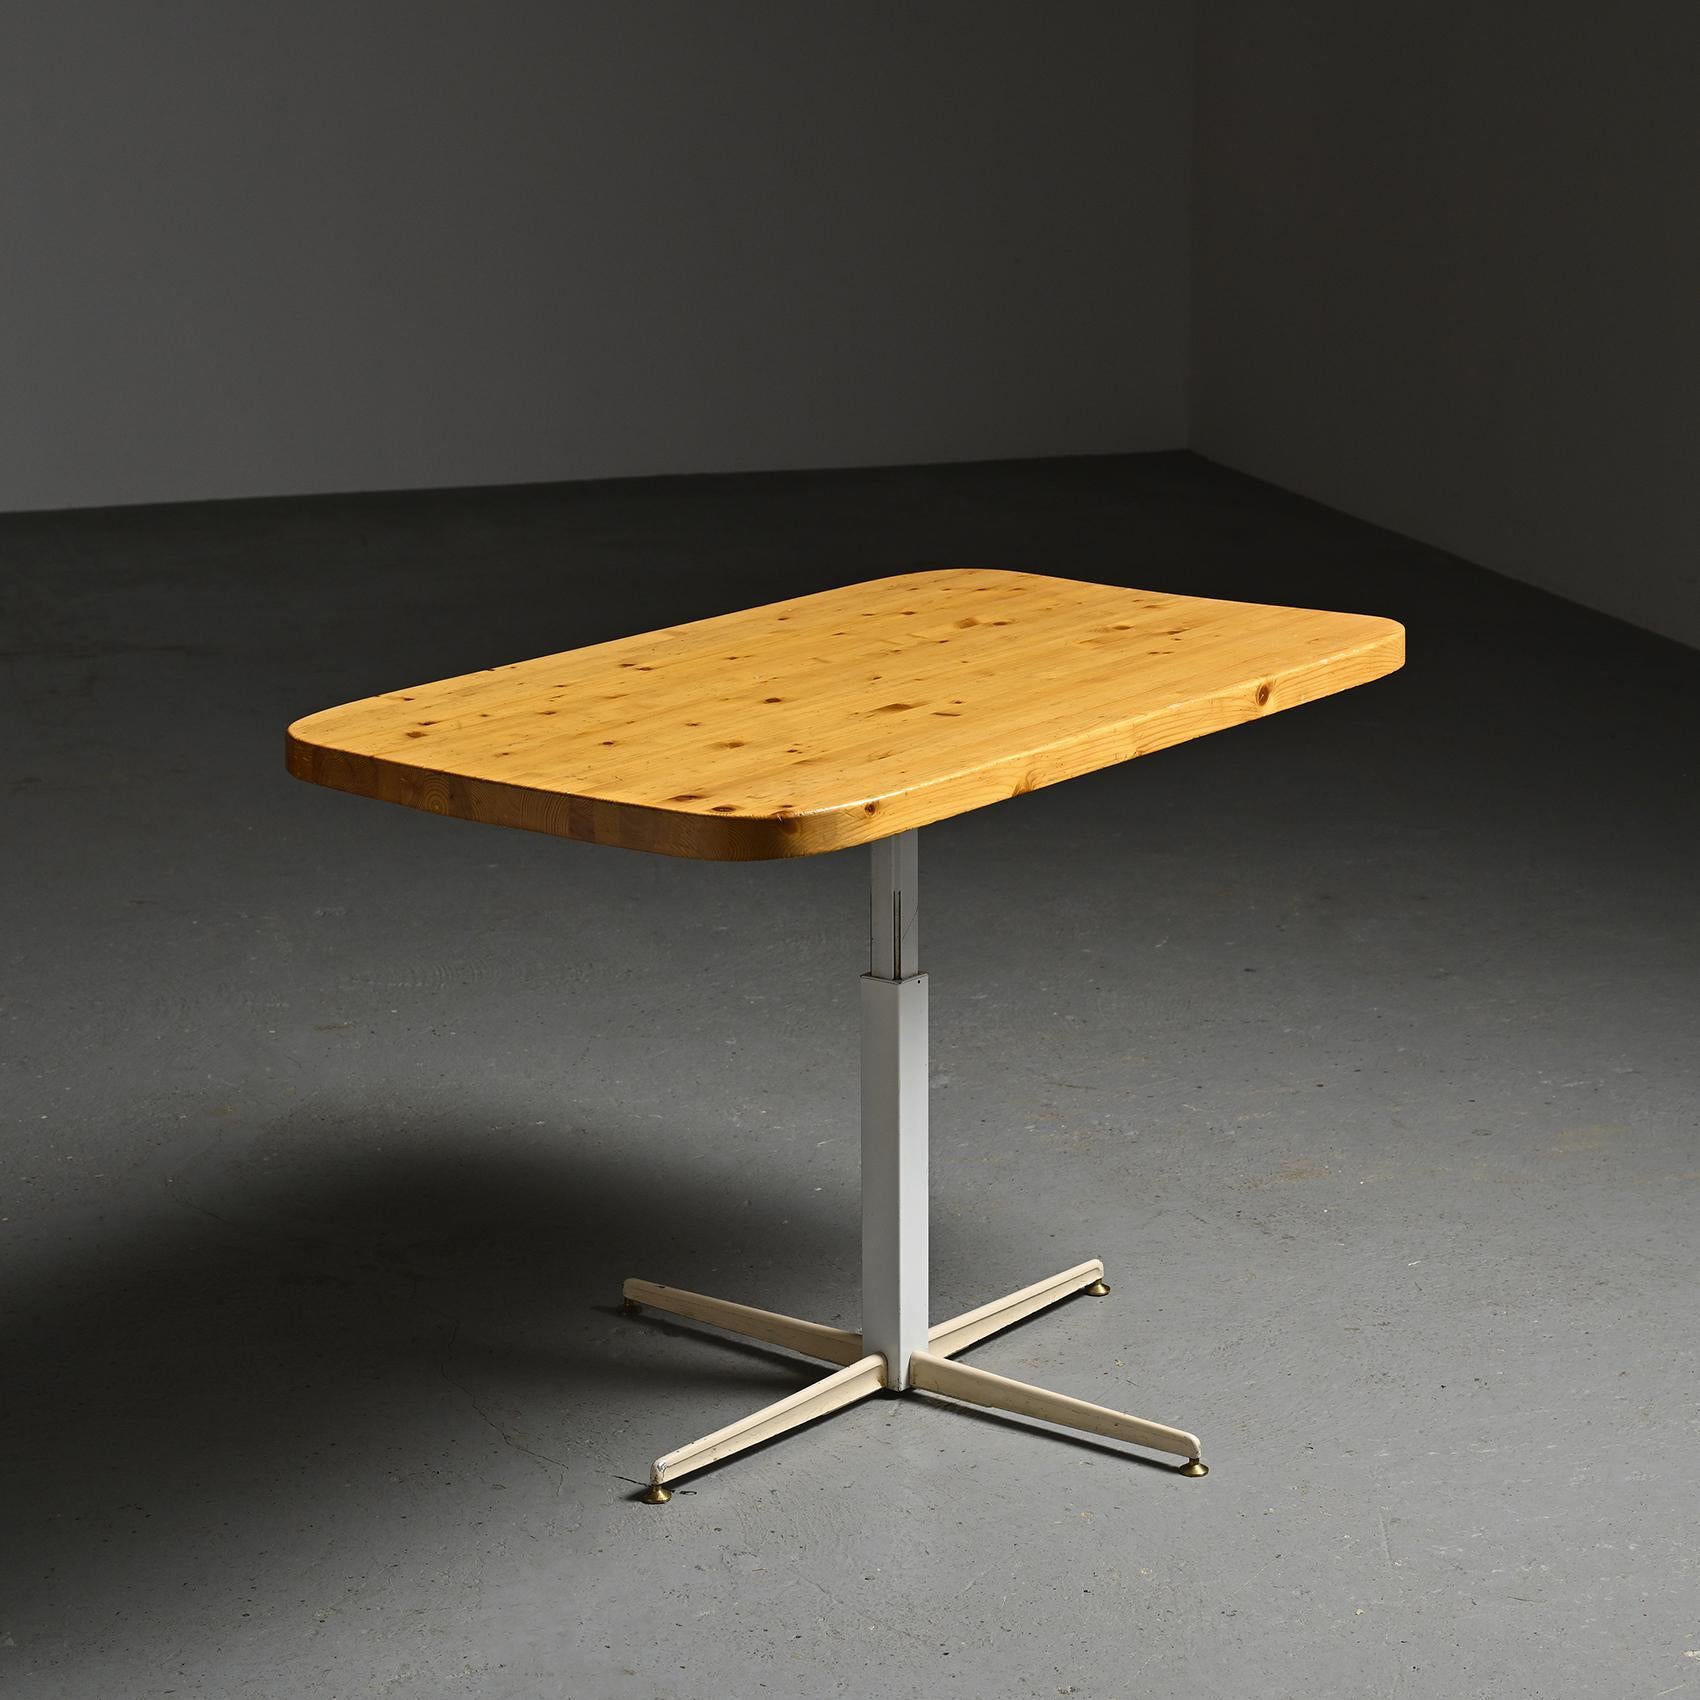 Rare height-adjustable rectangular table with rounded edges designed by Charlotte Perriand designed for the resort of Les Arcs in the 1970s.

It has a glued laminated pine top of rectangular shape with a beautiful patina, and rests on a white 